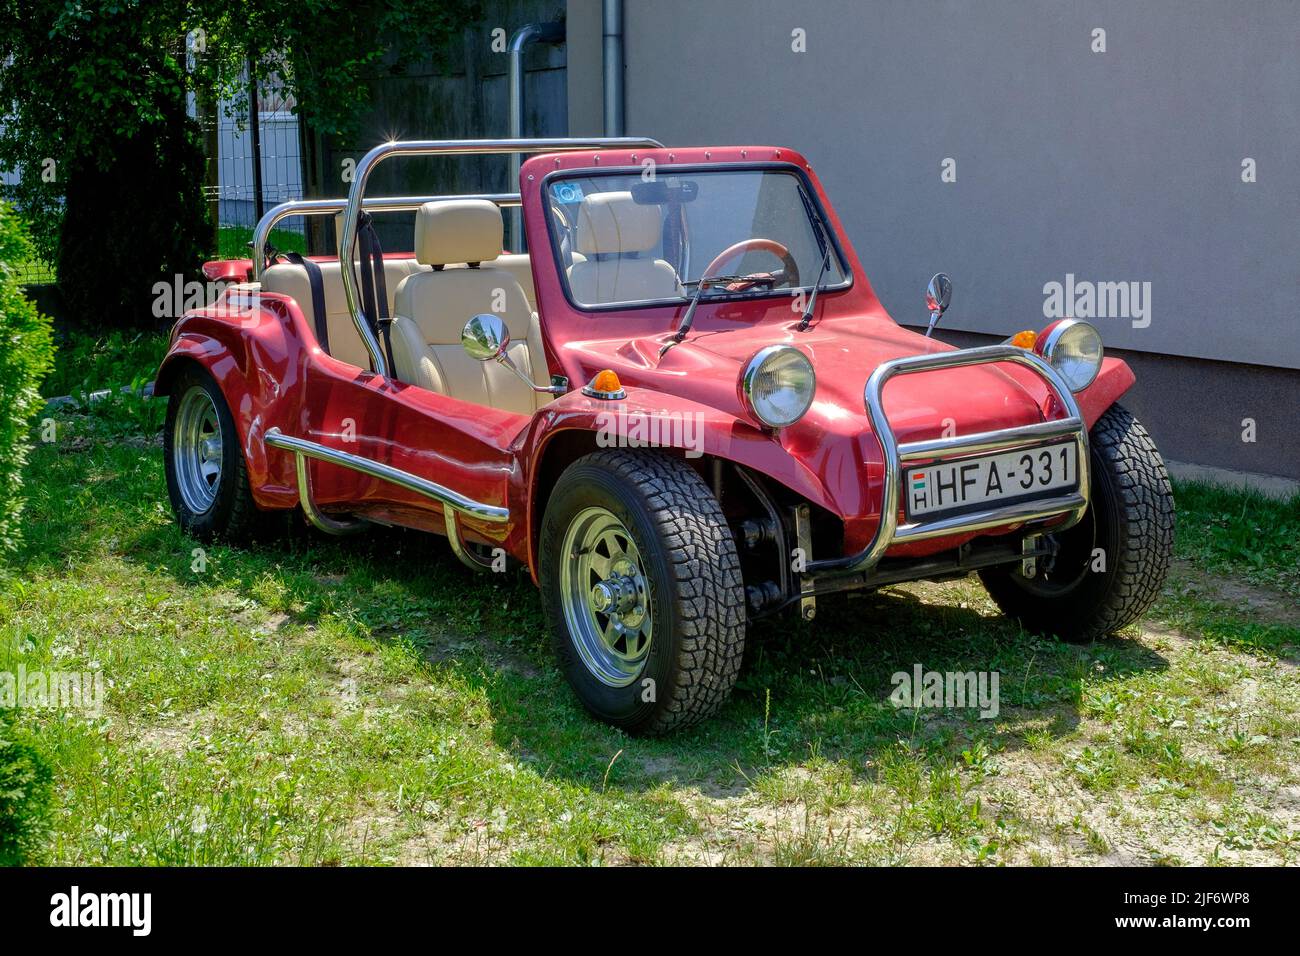 Volkswagen beach buggy style kit car parked on grass in front garden lenti zala county hungary Stock Photo